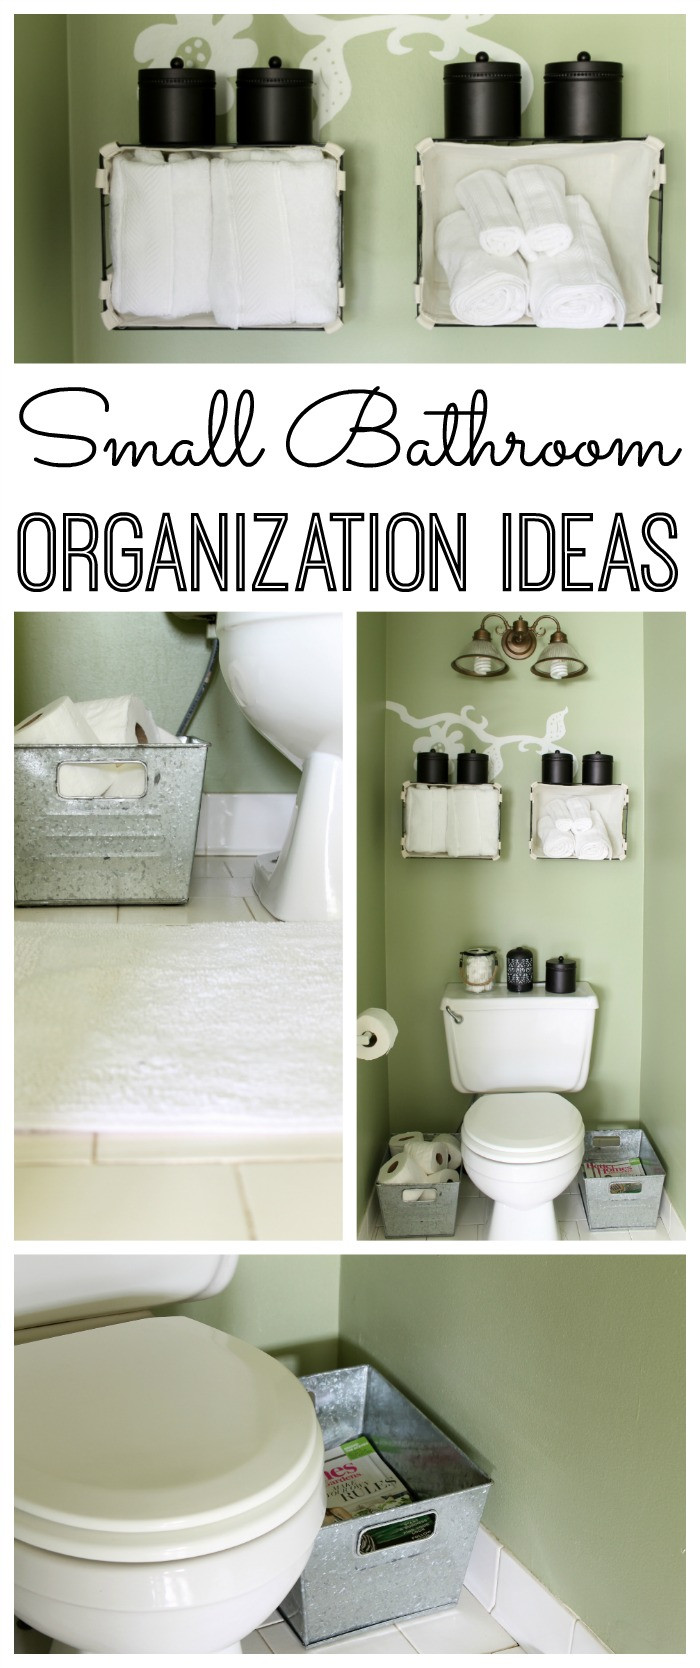 Small Bathroom Organization Ideas
 organization Archives The Country Chic Cottage